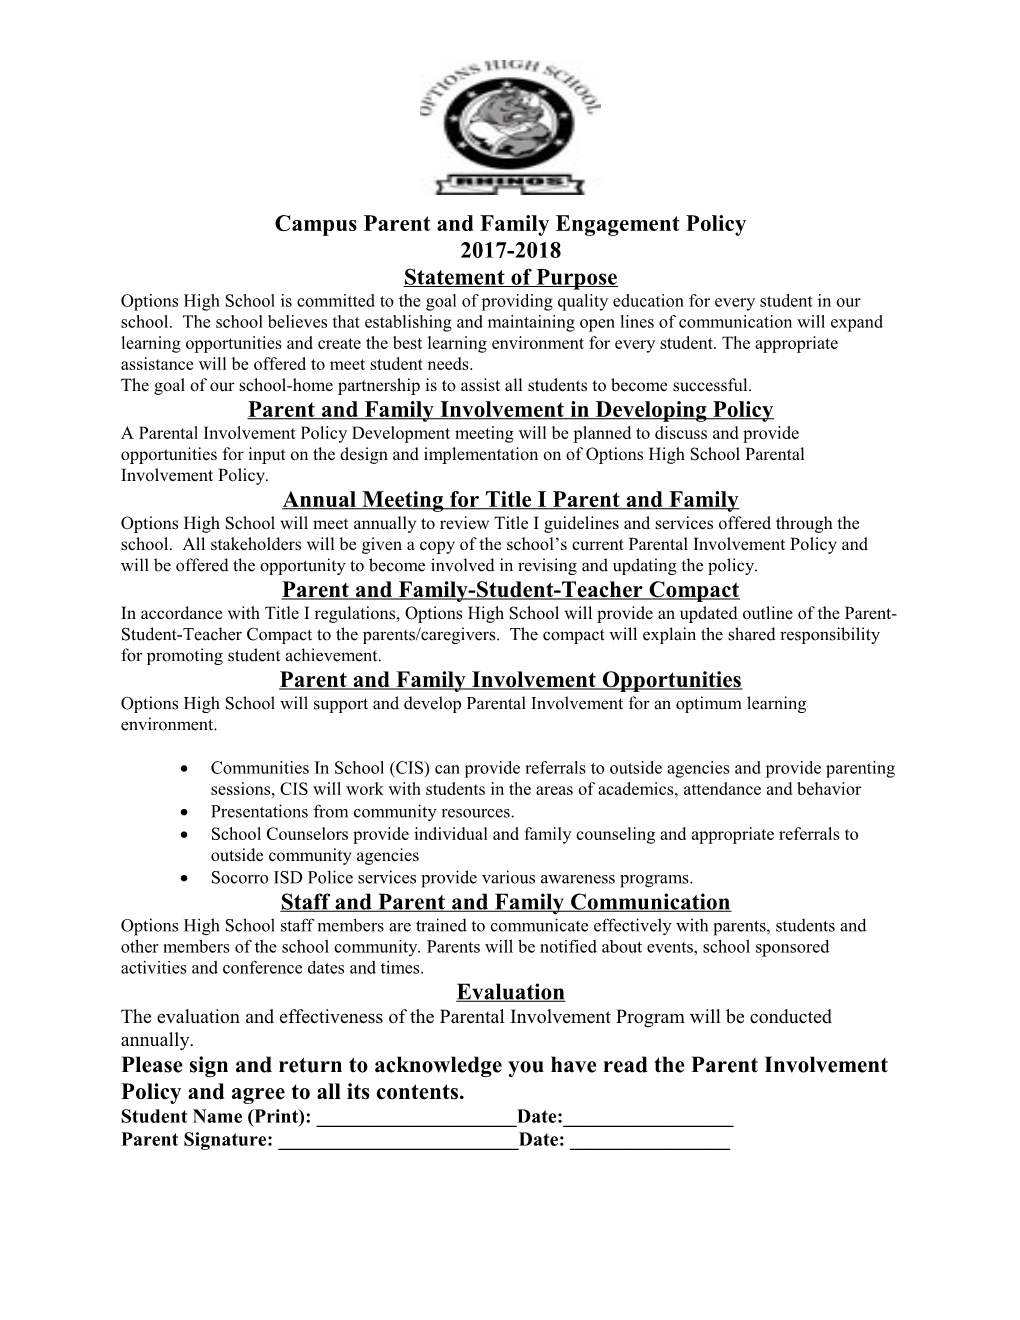 Campus Parent and Family Engagement Policy